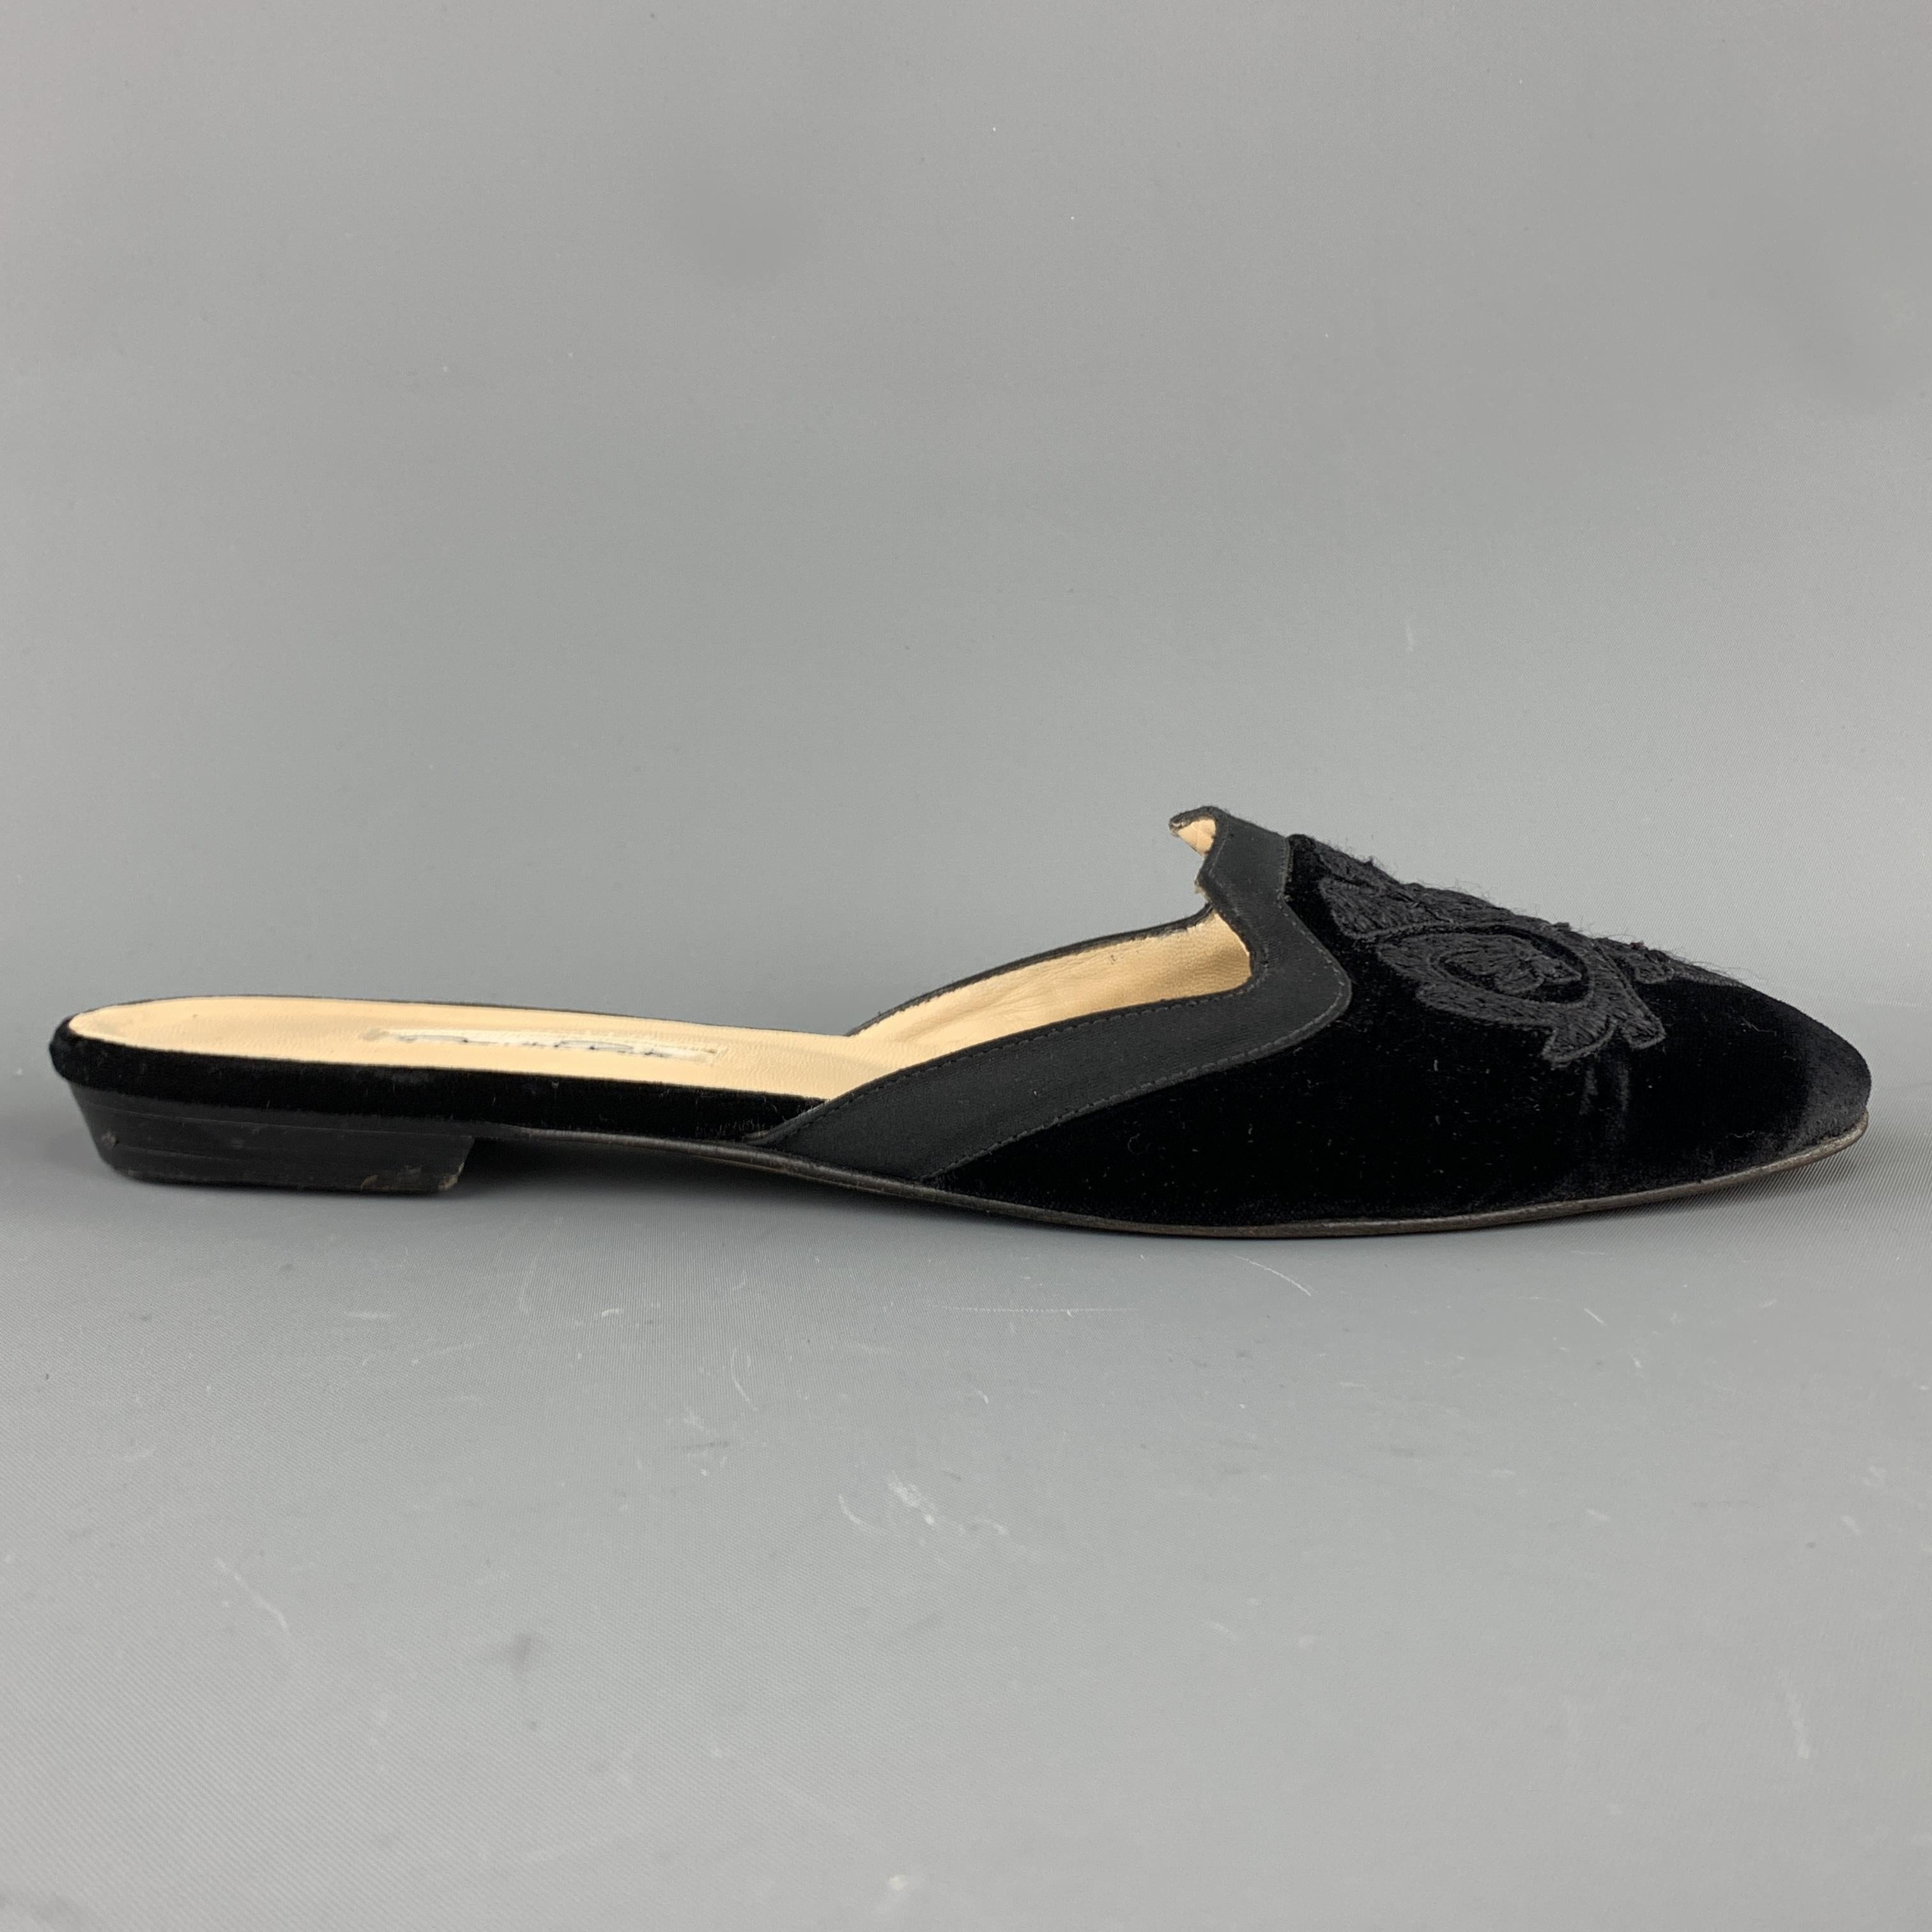 OSCAR DE LE RENTA mule flats come in black velvet with embroidery. Made in Italy.

Excellent Pre-Owned Condition.
Marked: IT 40

Outsole: 10.75 x 3.75 in.